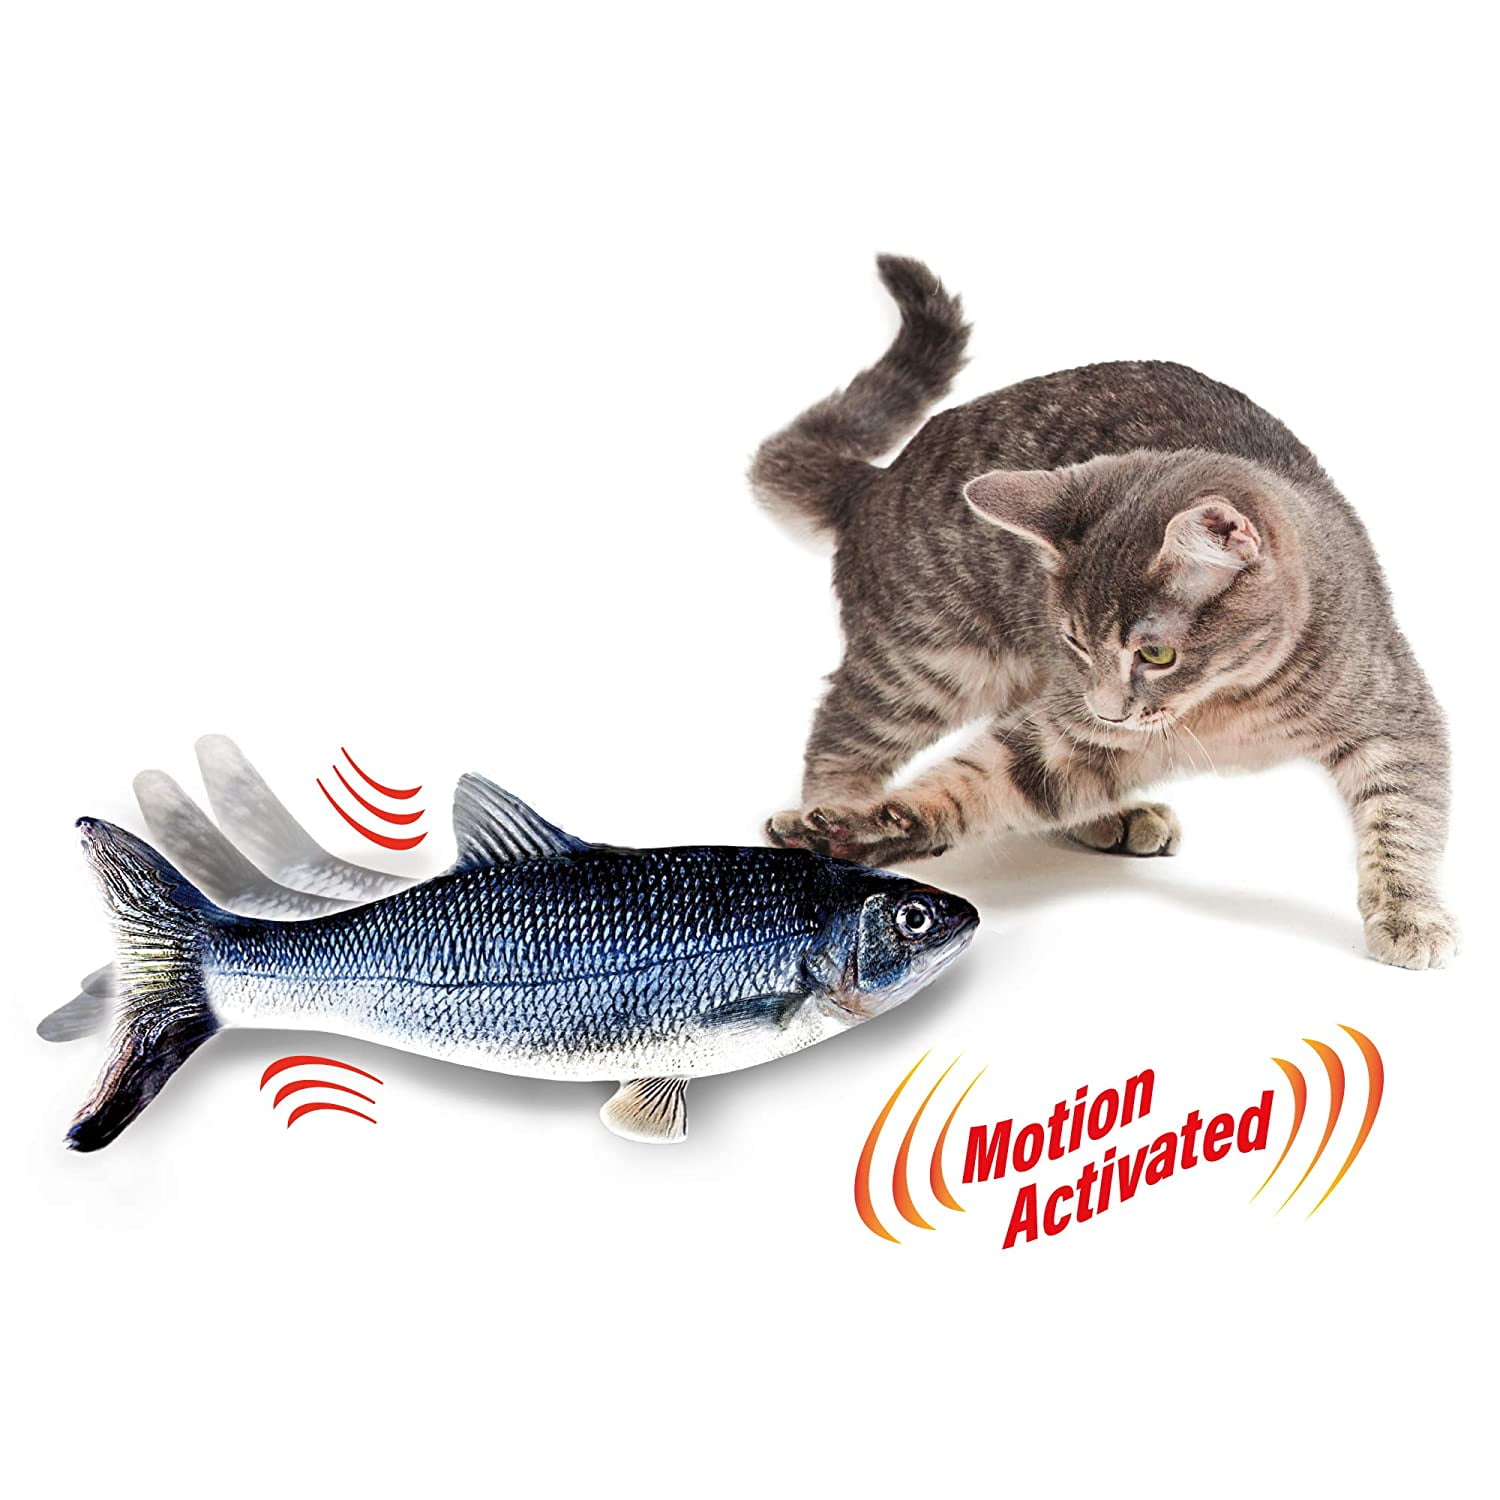 Flippity Fish Cat Toy, Interactive Cat Toy, Flips, Flops & Wiggles Like